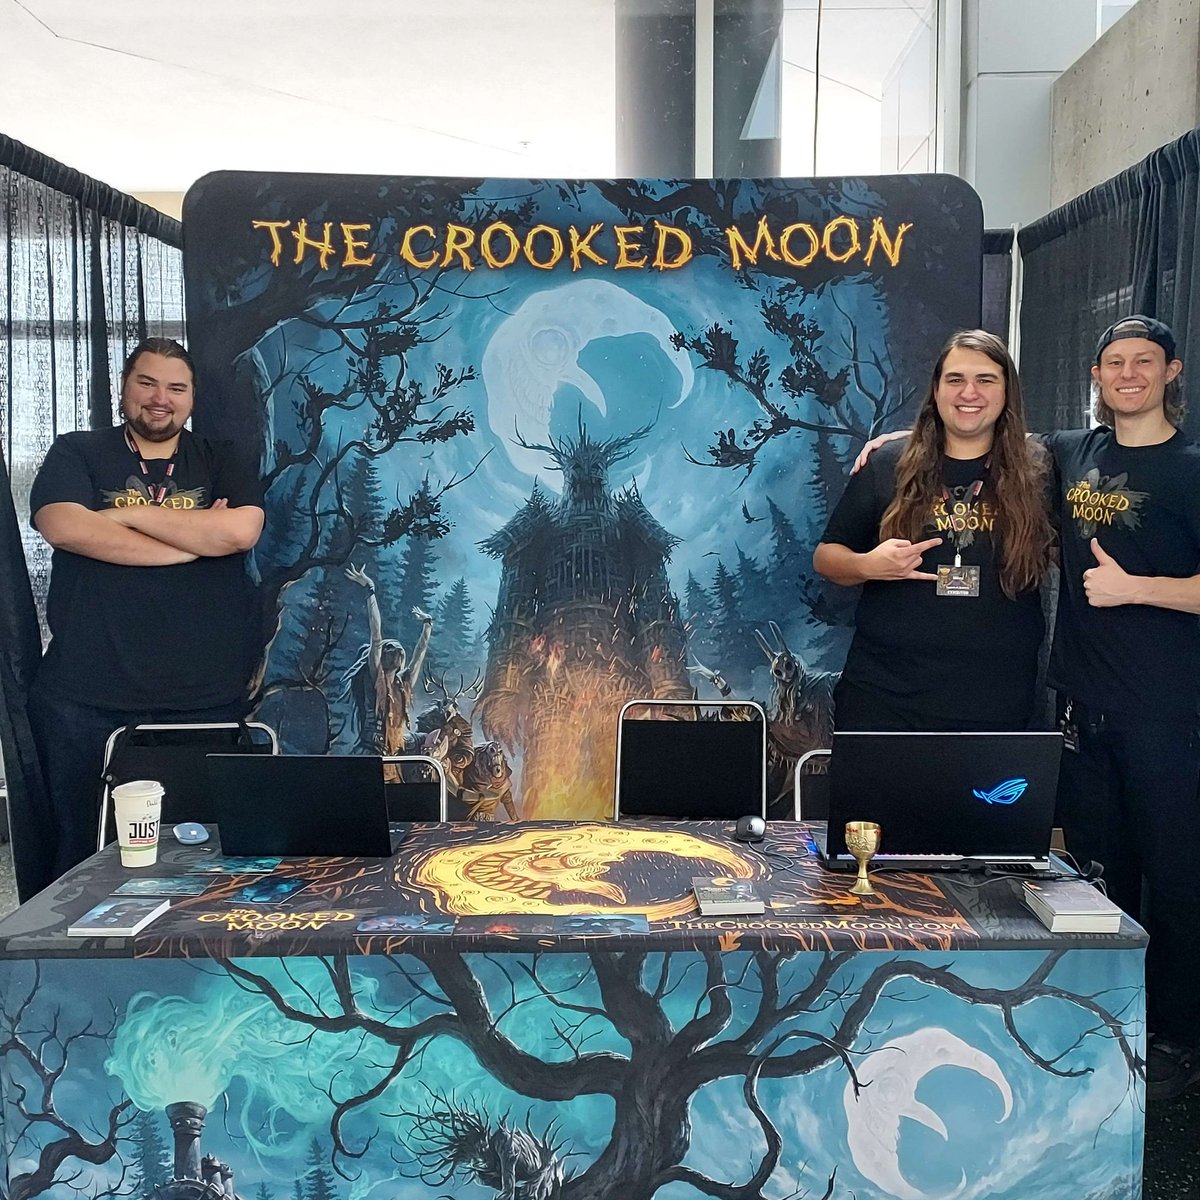 We're at #GameholeCon! Come stop by and say hello! We're talking The Crooked Moon!

#dnd #dnd5e #ttrpg